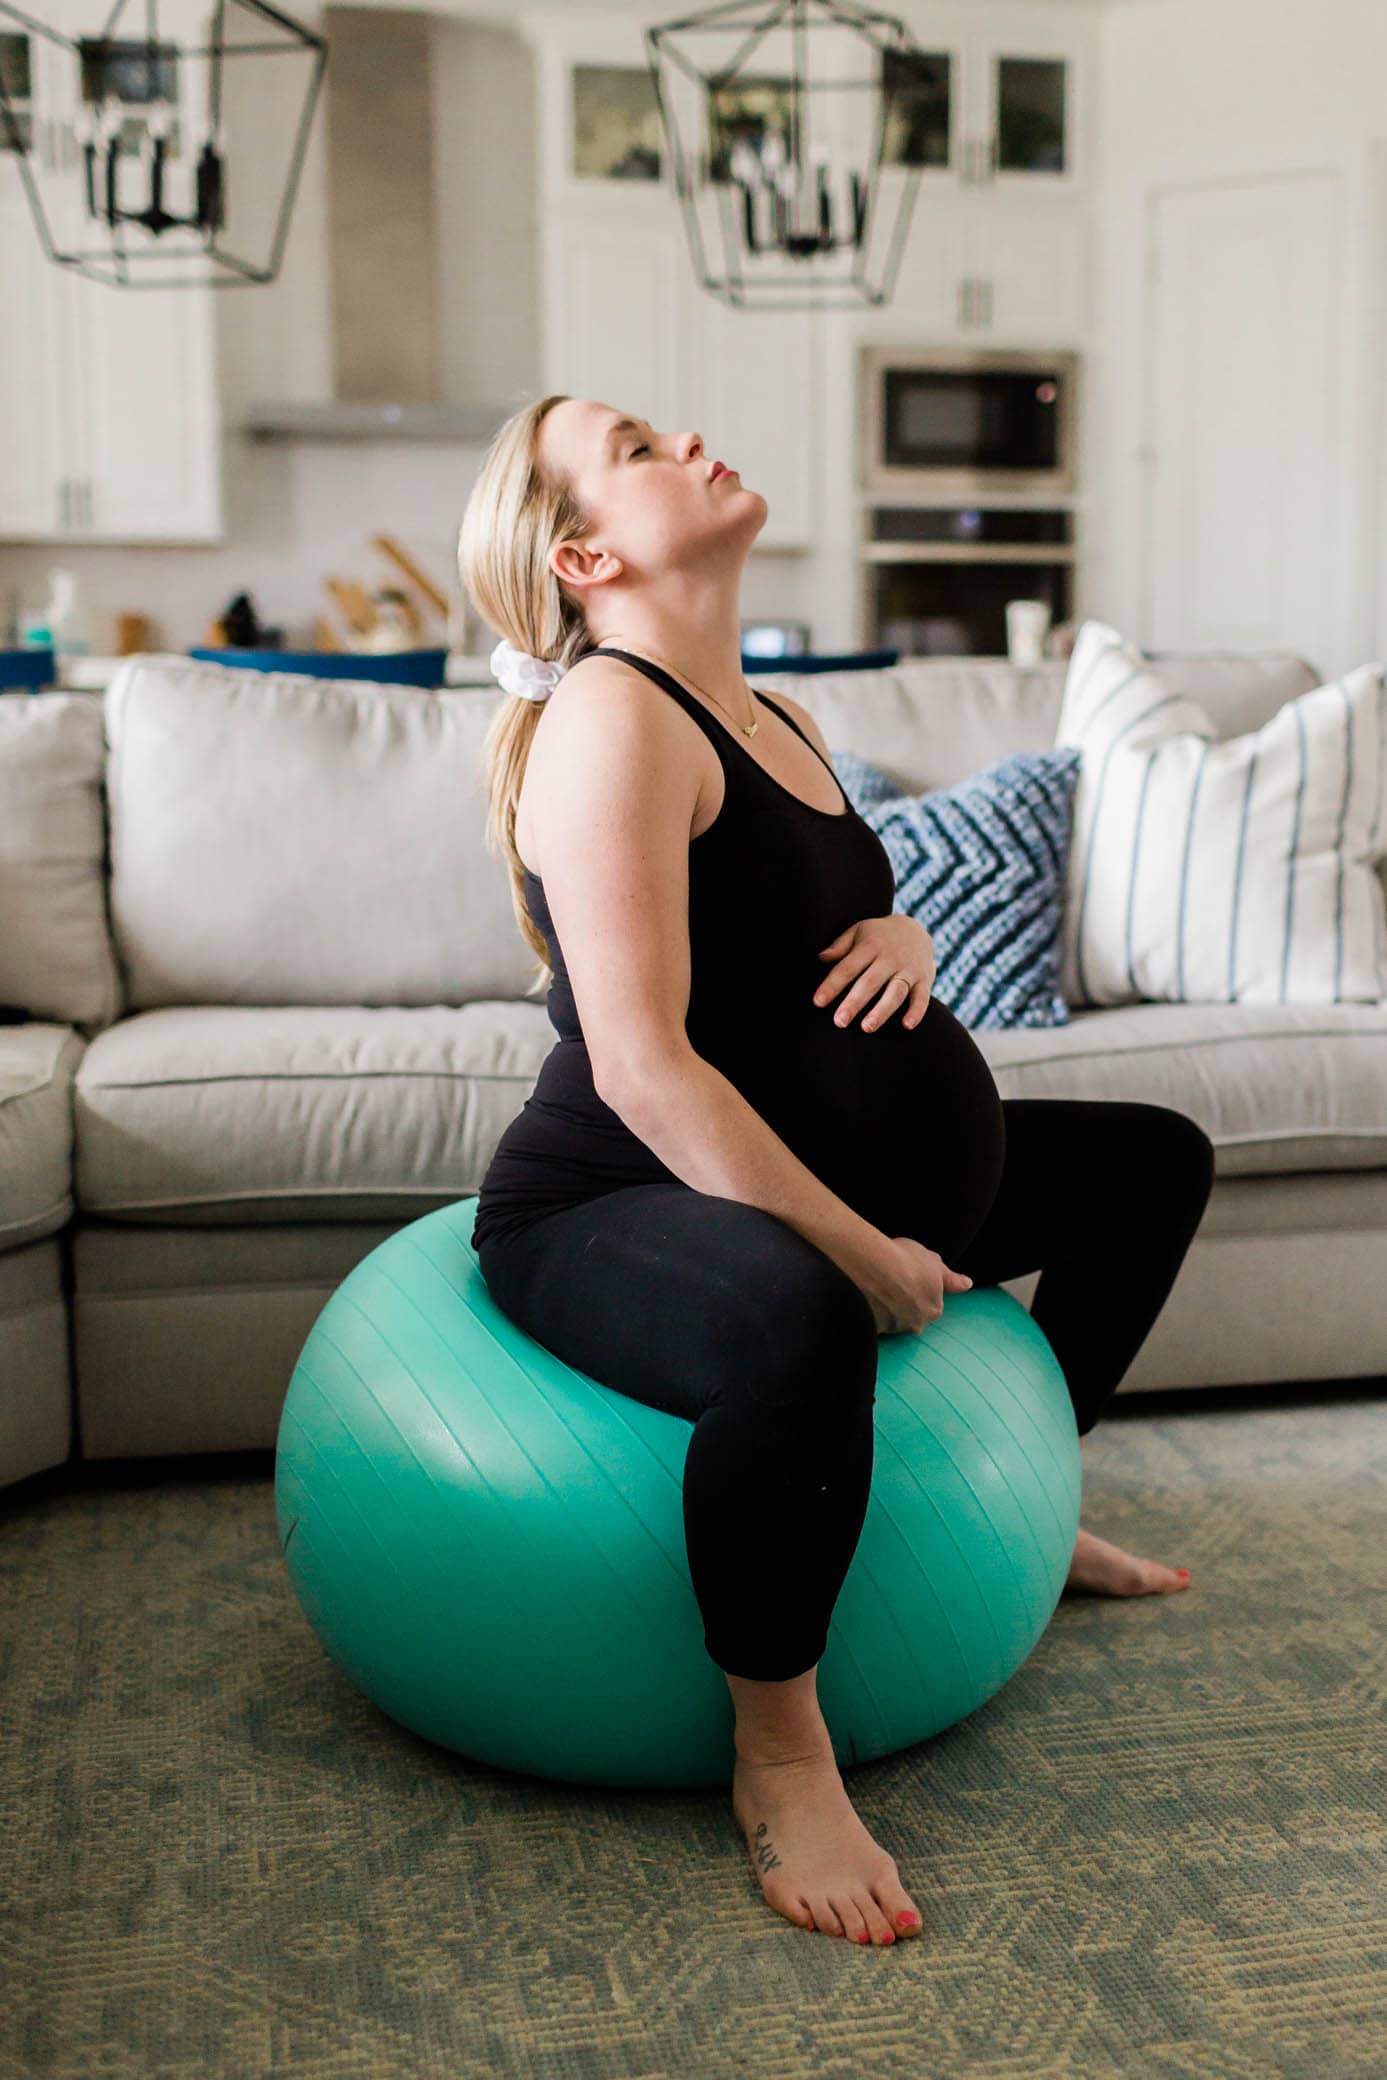 Pregnant woman sitting on a birth ball while in transition labor.